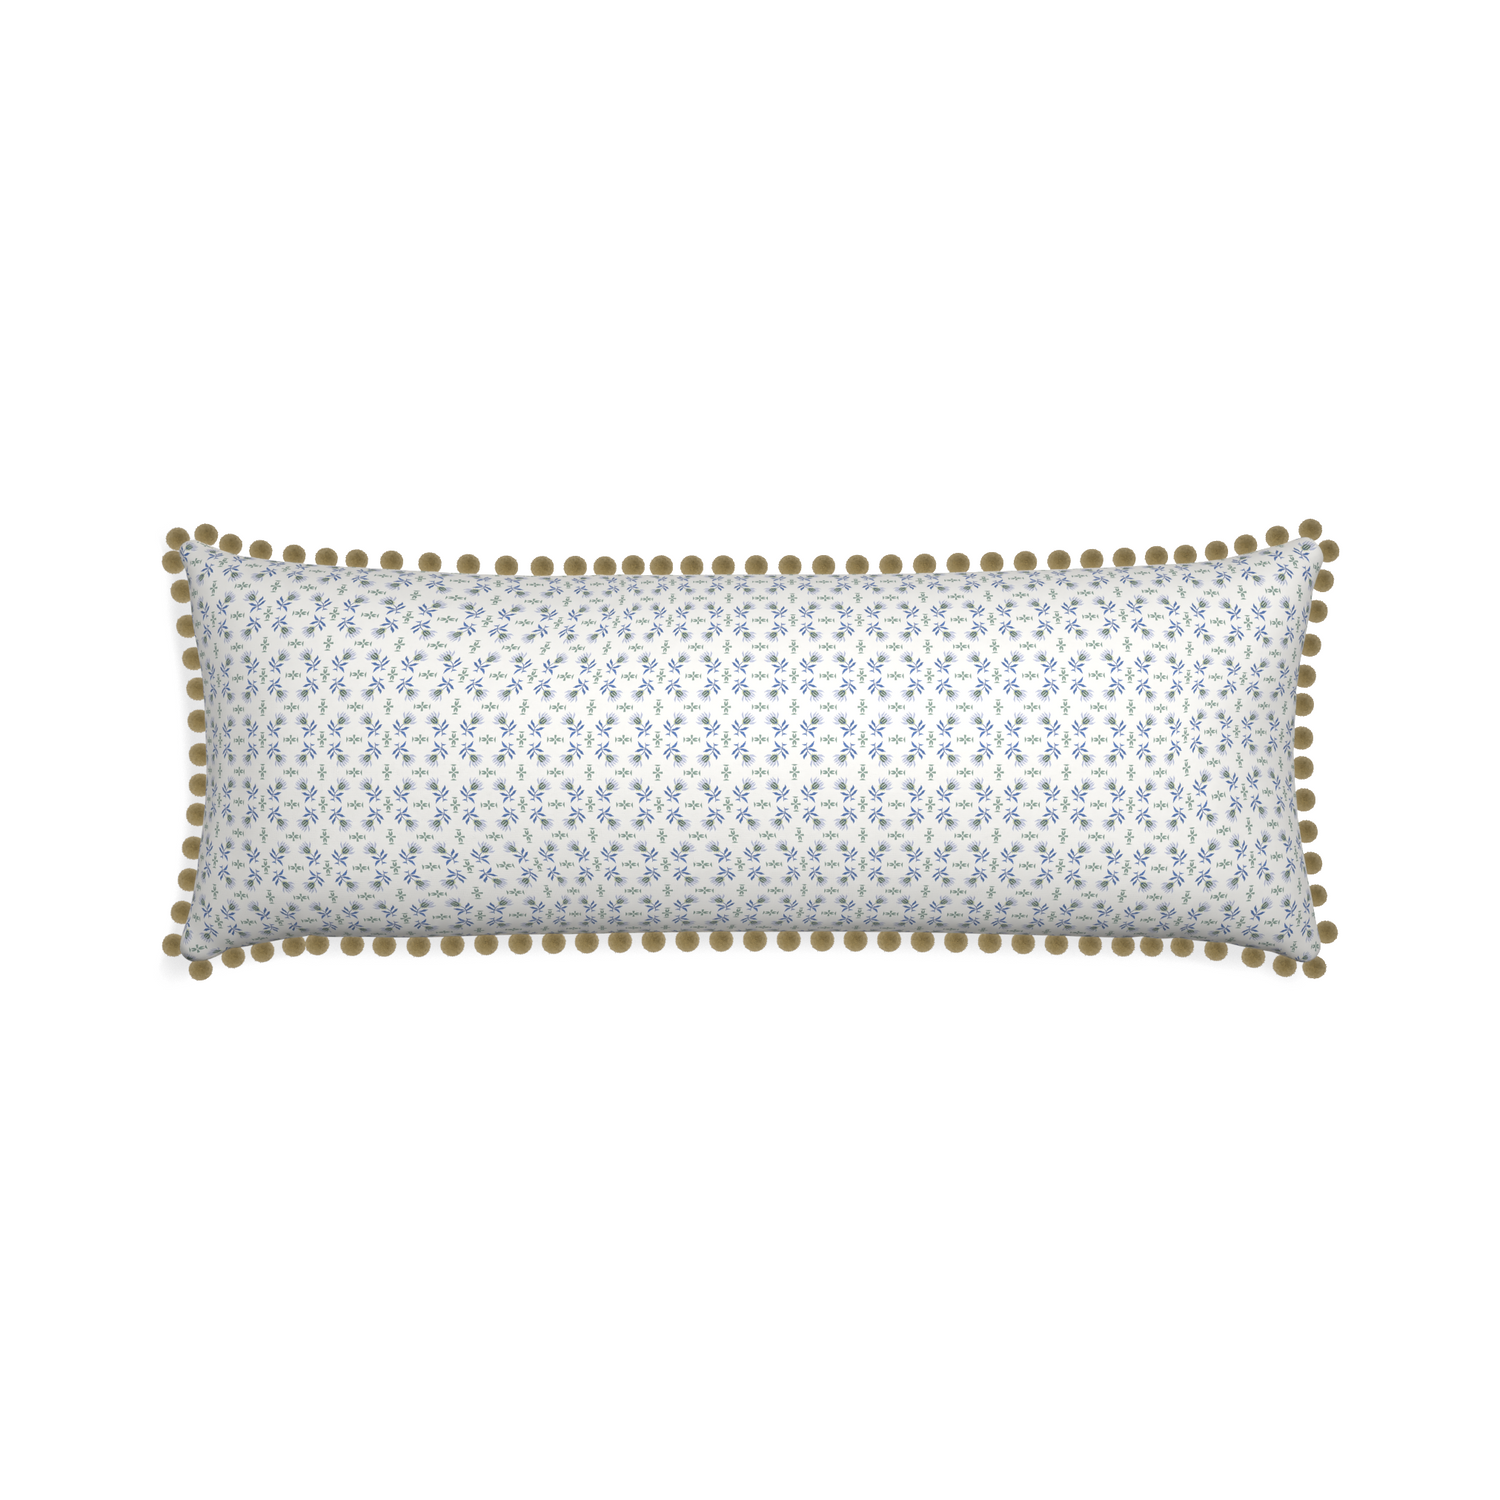 Xl-lumbar lee custom blue & green floralpillow with olive pom pom on white background